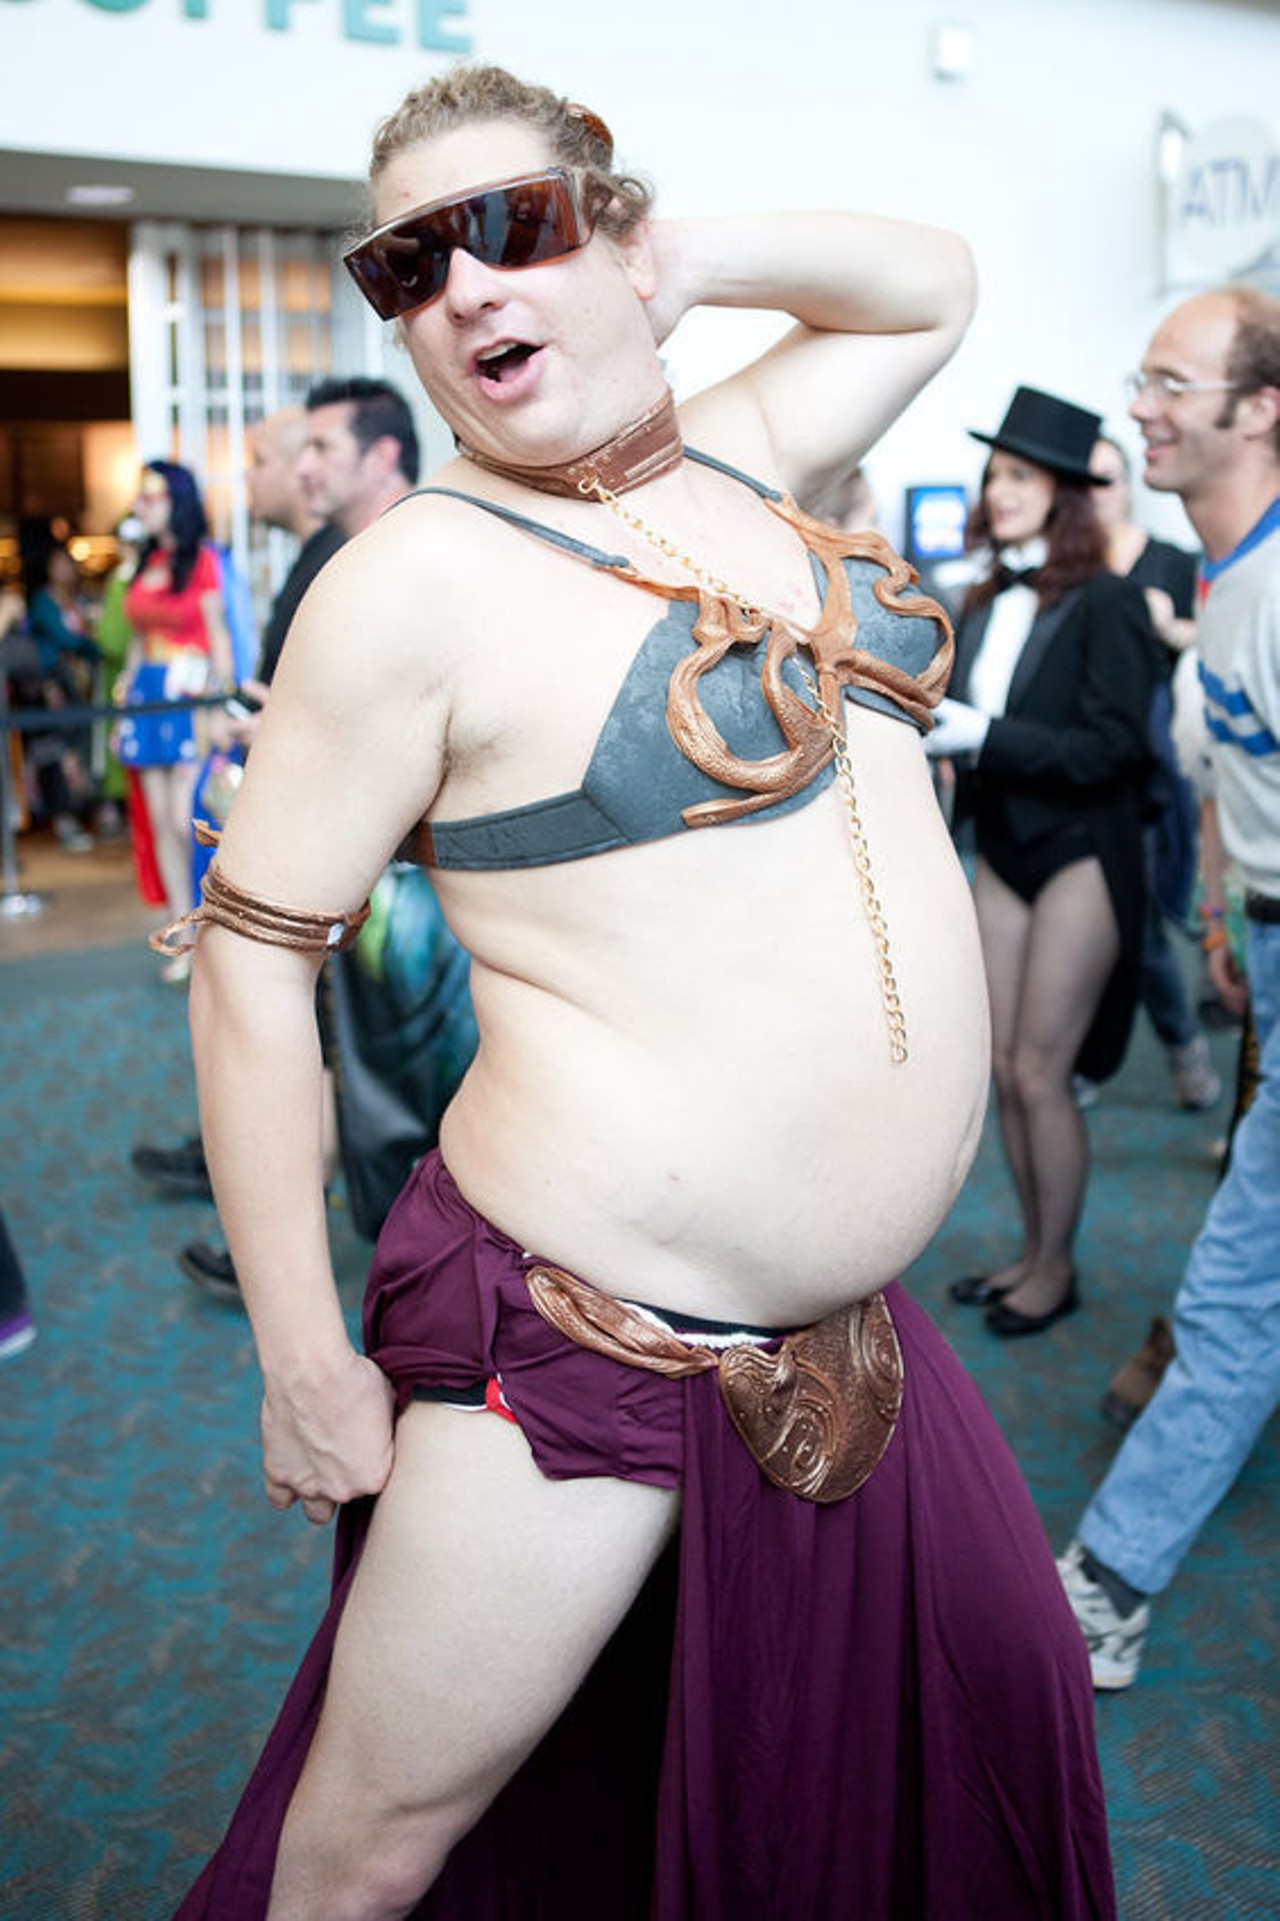 The star power came out in San Diego, as cosplayers outfits included nods towards My Little PonyFriendship is Magic, Game of Thrones, Chef Vader, Spaceballs Barf,Homestuck, The Venture Brothers, a never-nude Tobia F&uuml;nke still seeking his Blue Man Group, and the always-popular gender bent slave Leia. See more Photos from San Diego Comic Con 2012.